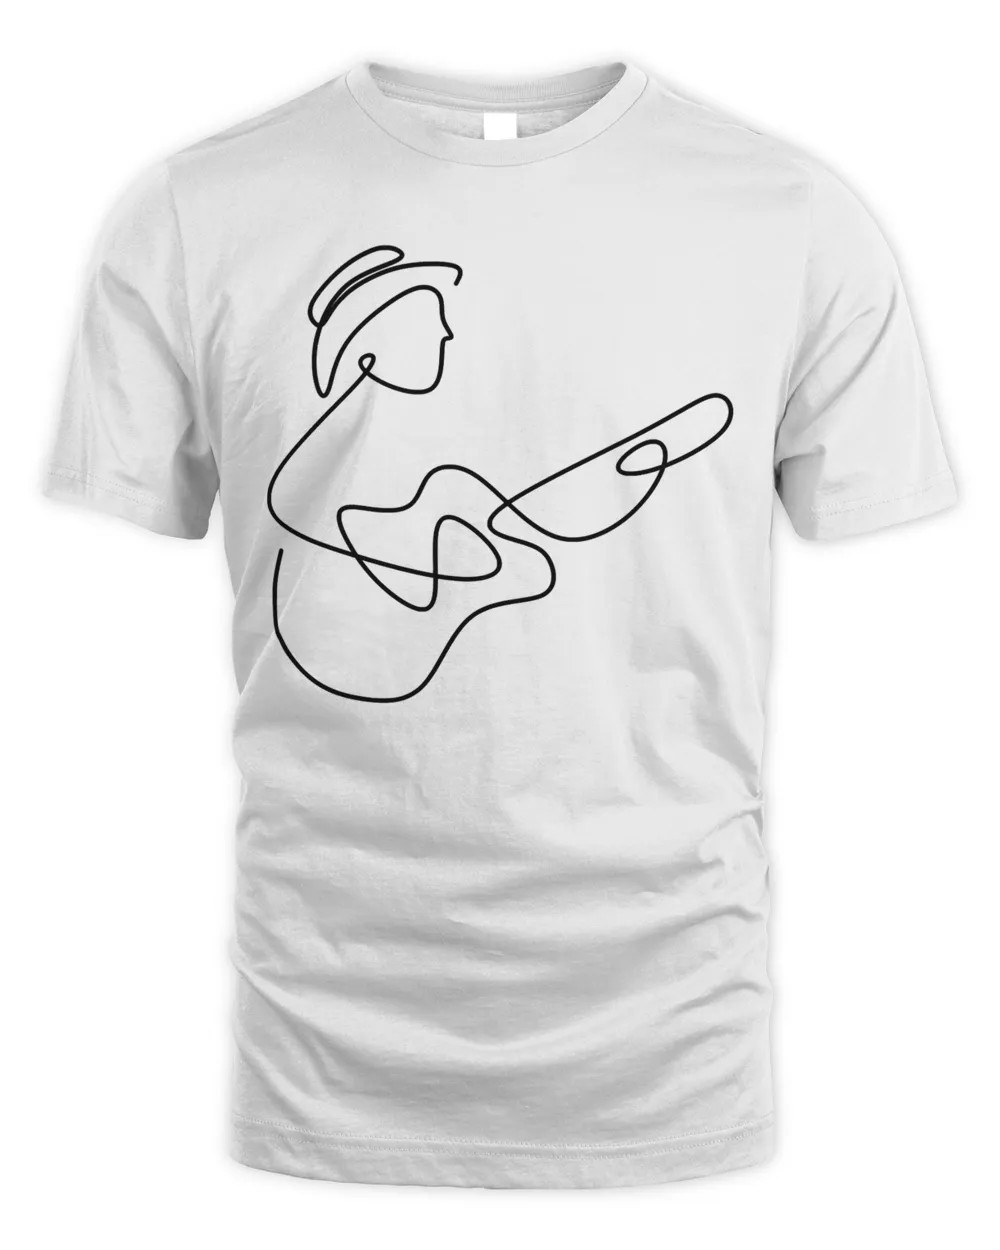 jazz guitar al music instrument player performer continuous one line drawing, simplicity, ske